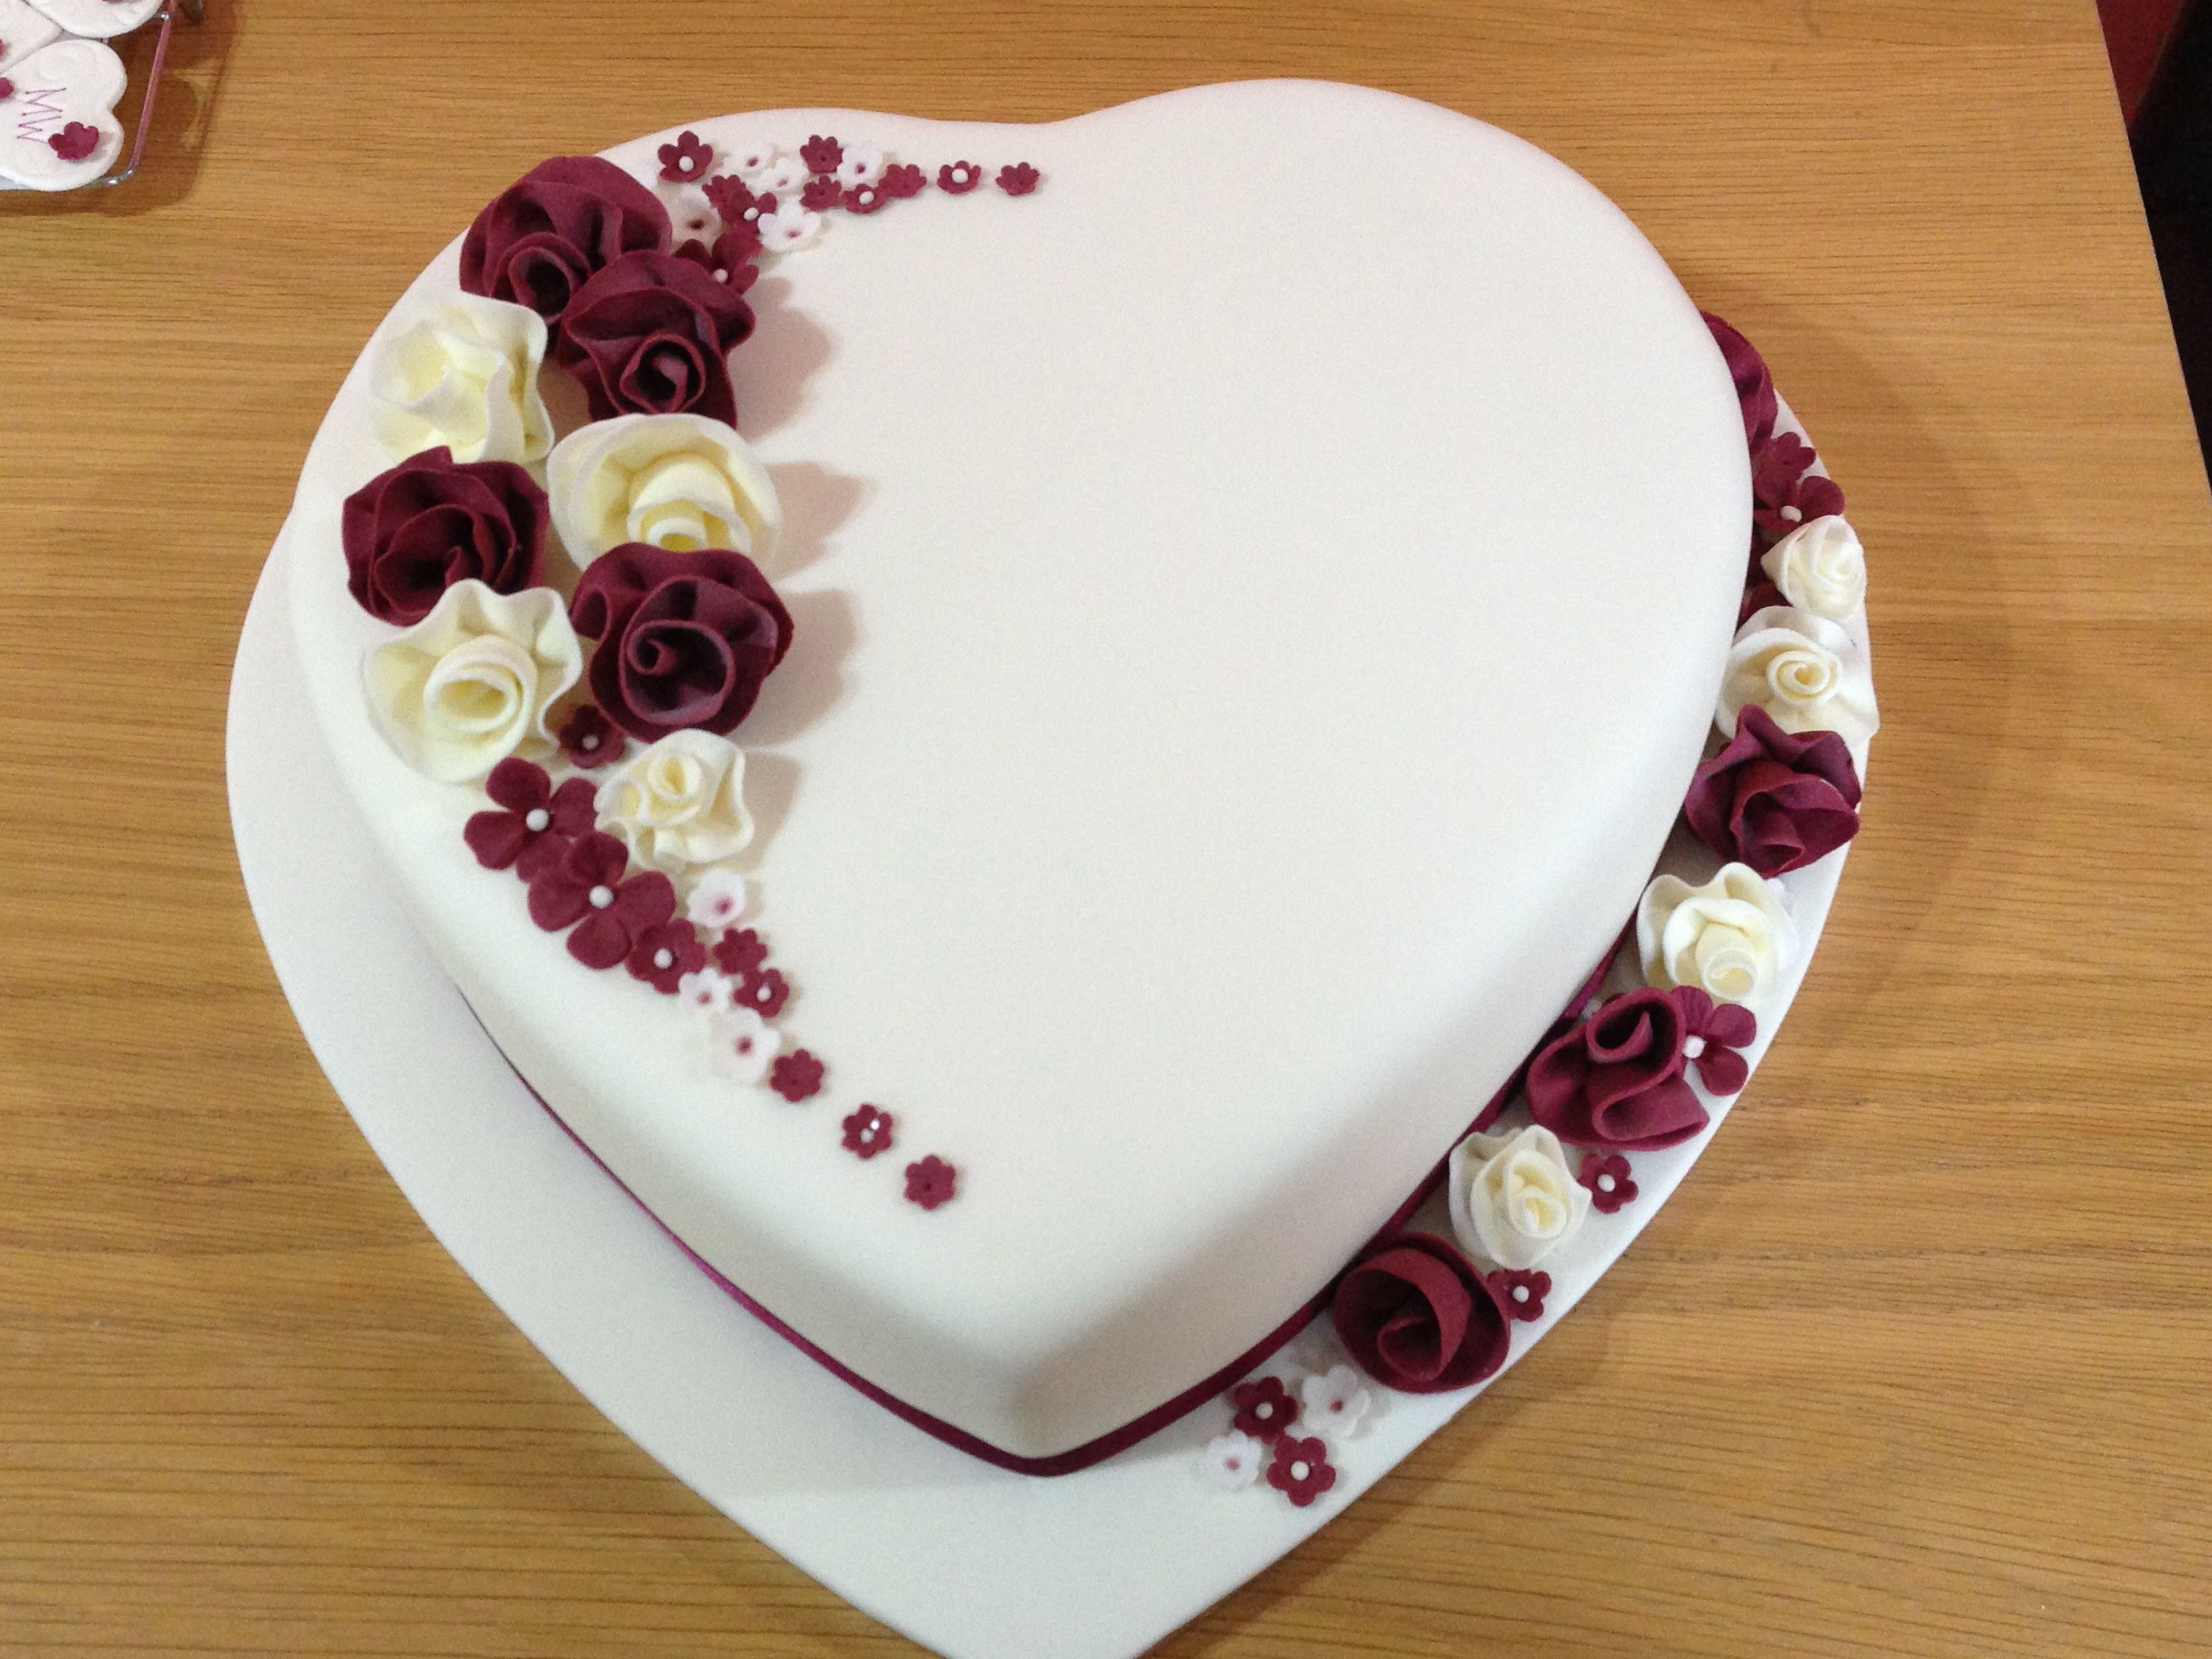 Heart shaped wedding cake with whimsical flowers - Fondant covered ...